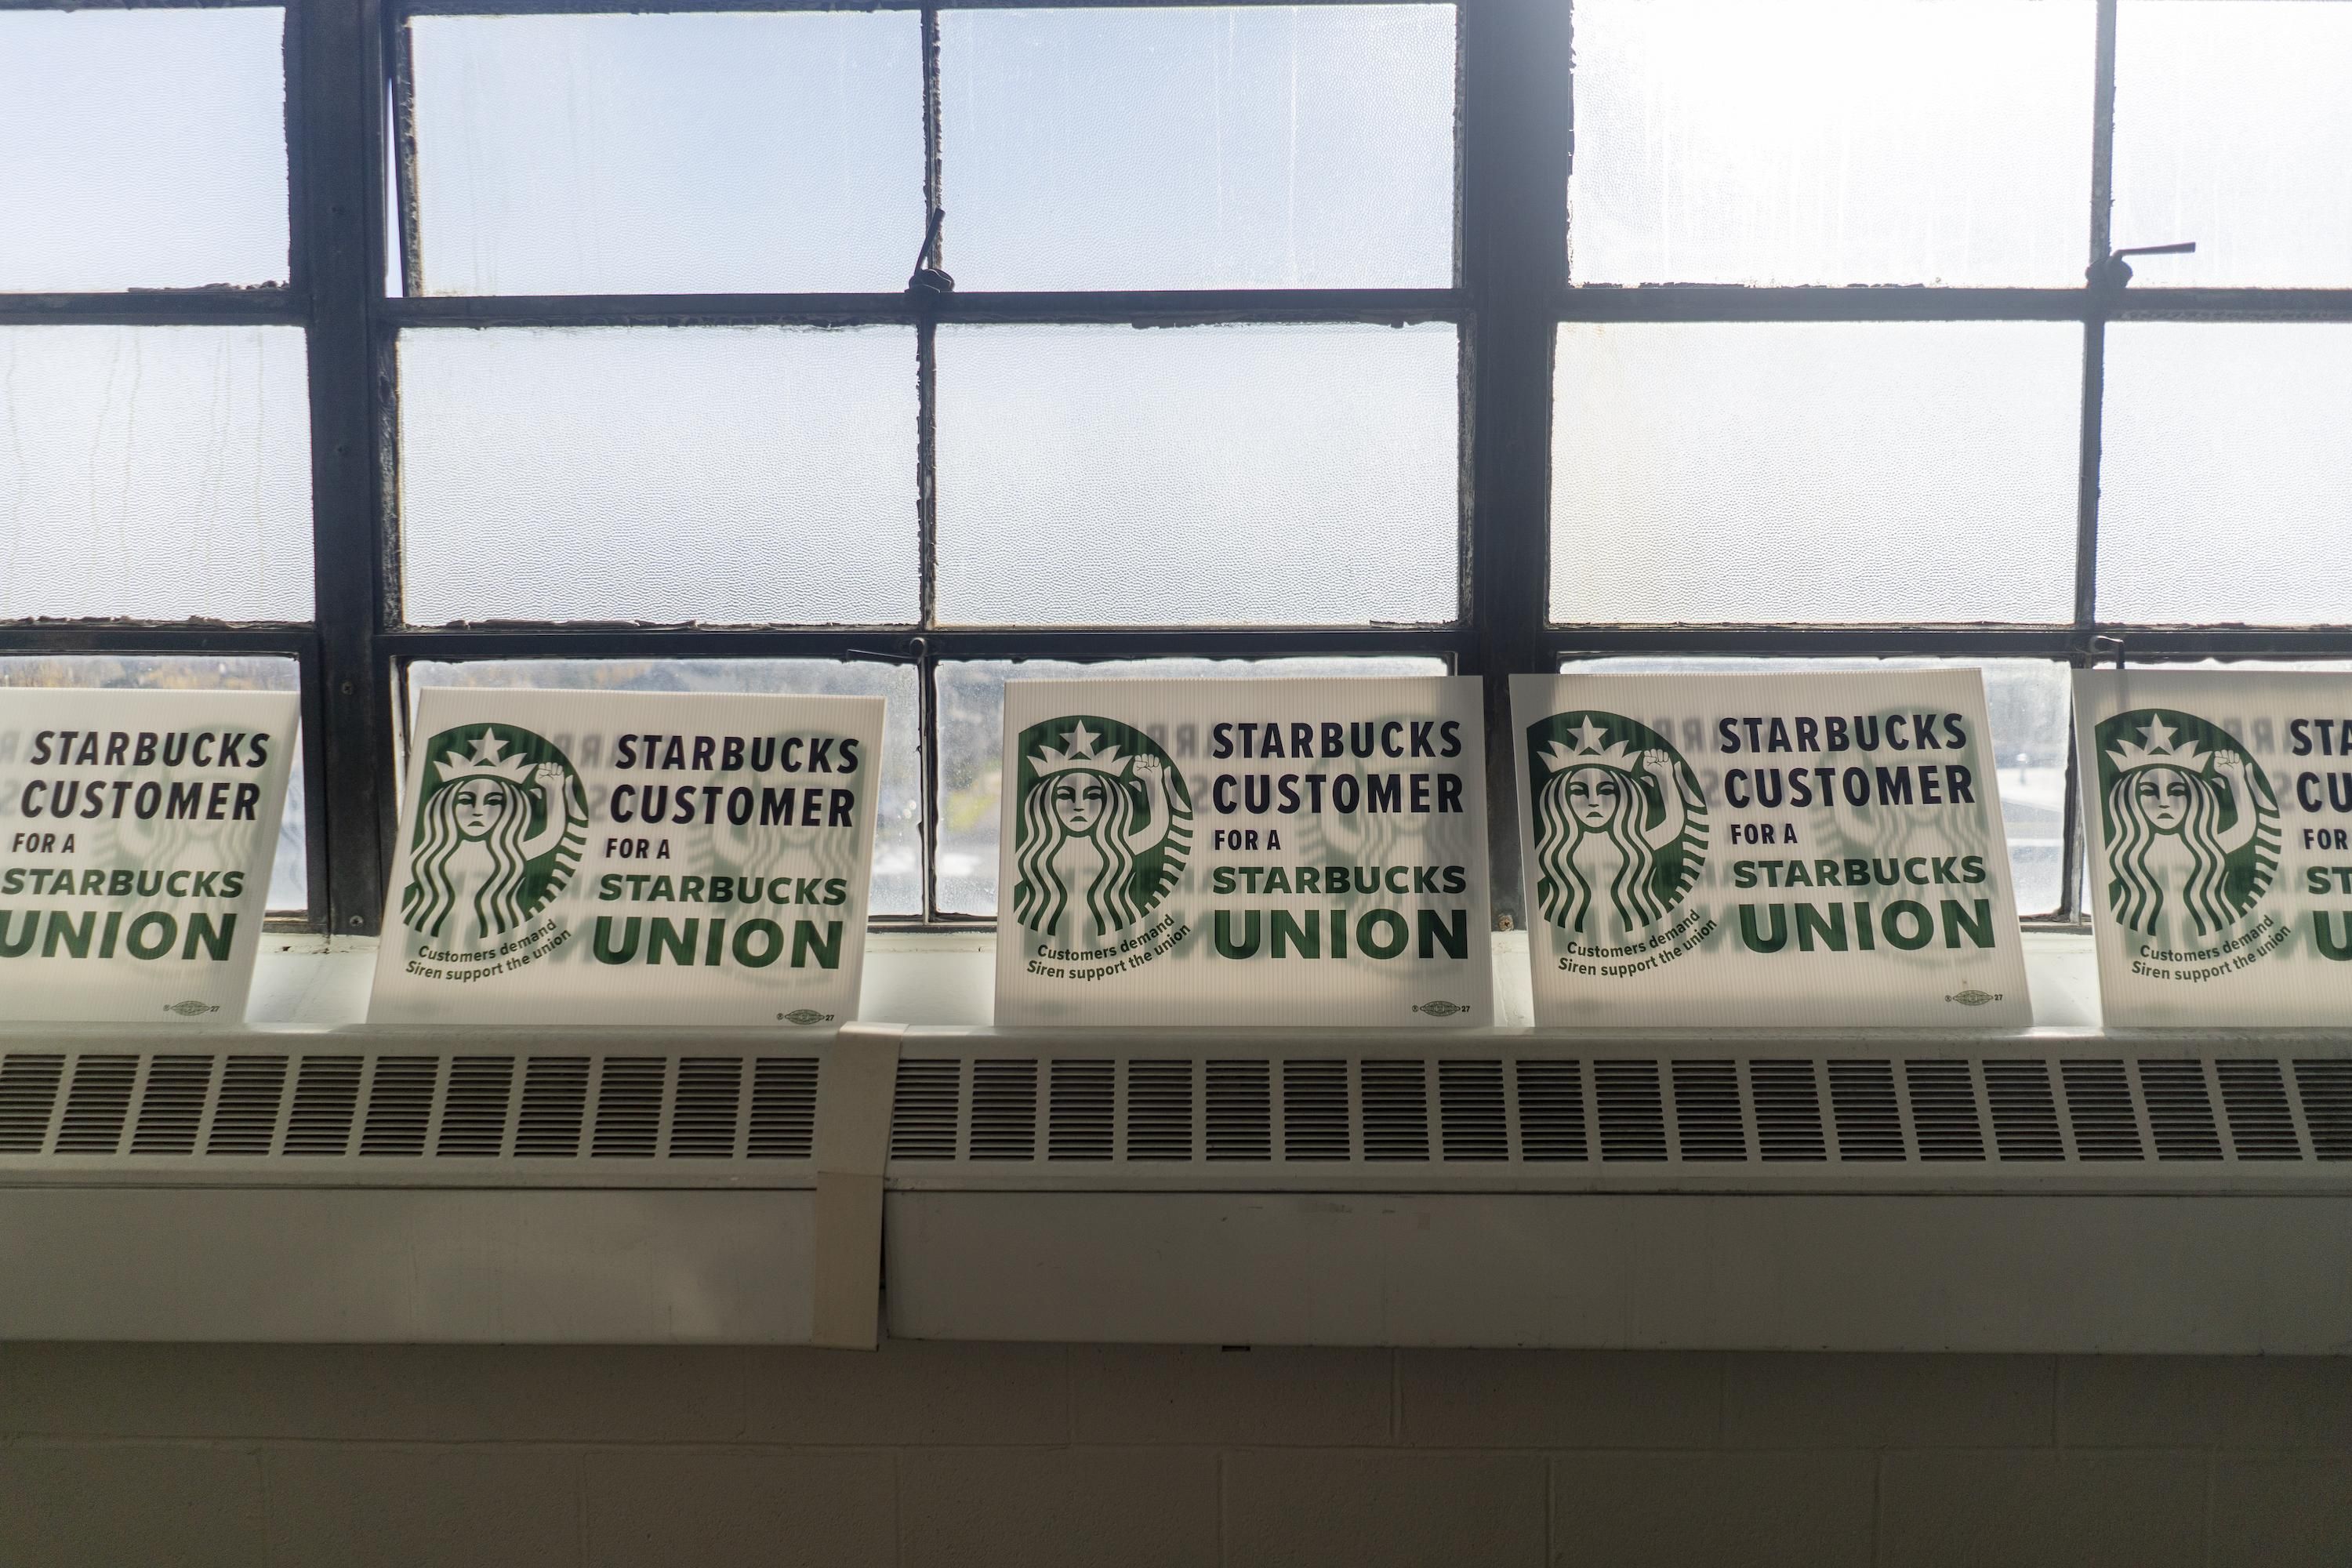 The Starbucks Workers United hub in Buffalo, New York on November 16, 2021. (Photo: Libby March for The Washington Post via Getty Images)